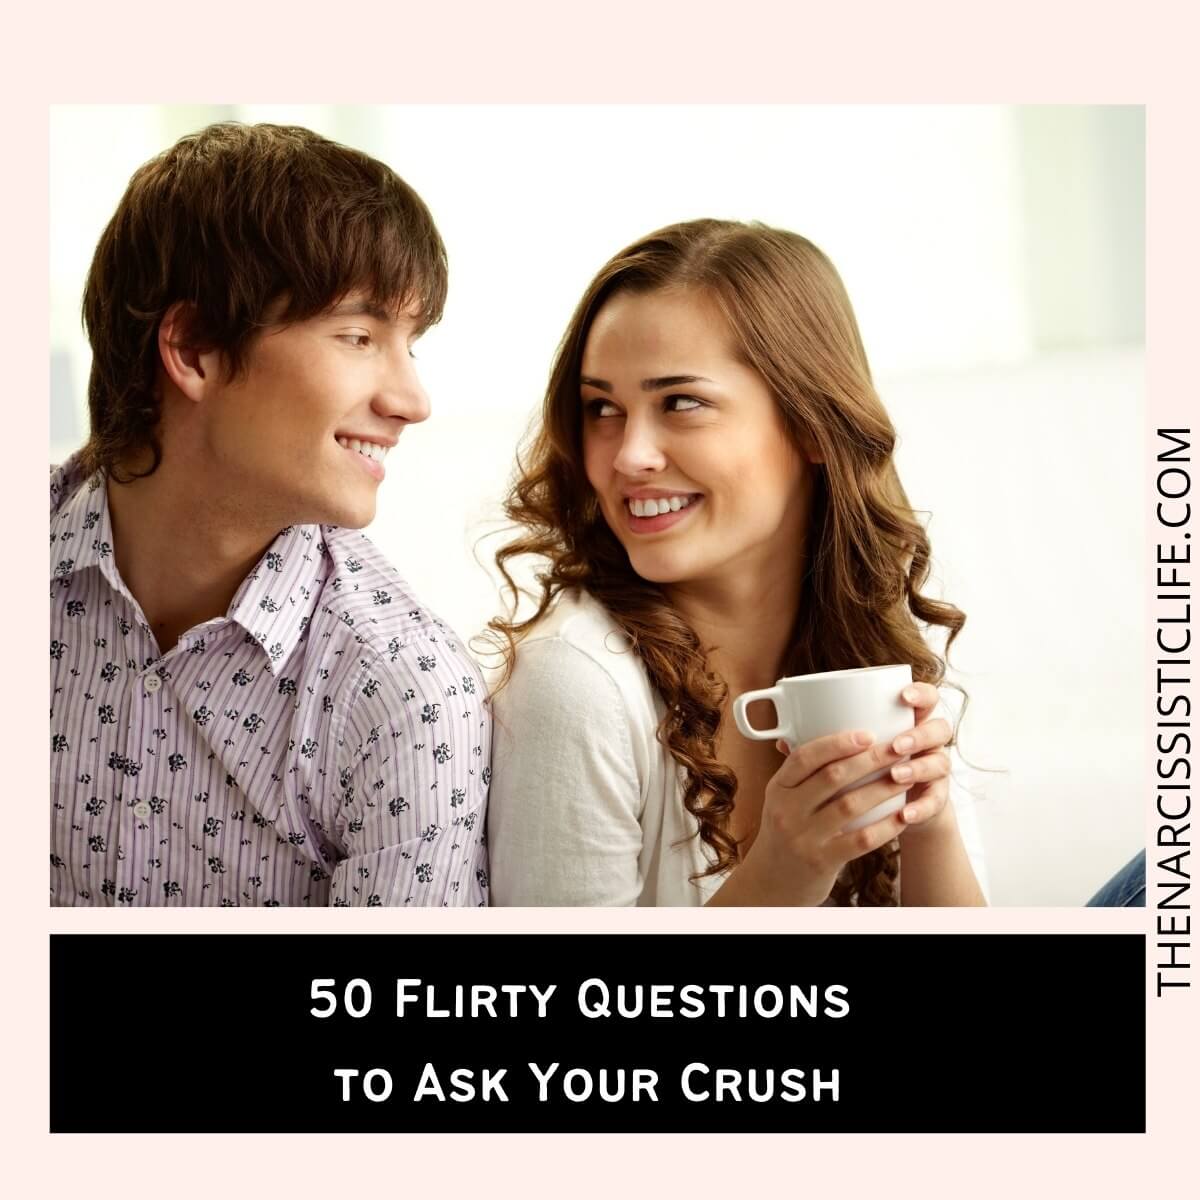 What are some questions to ask your crush